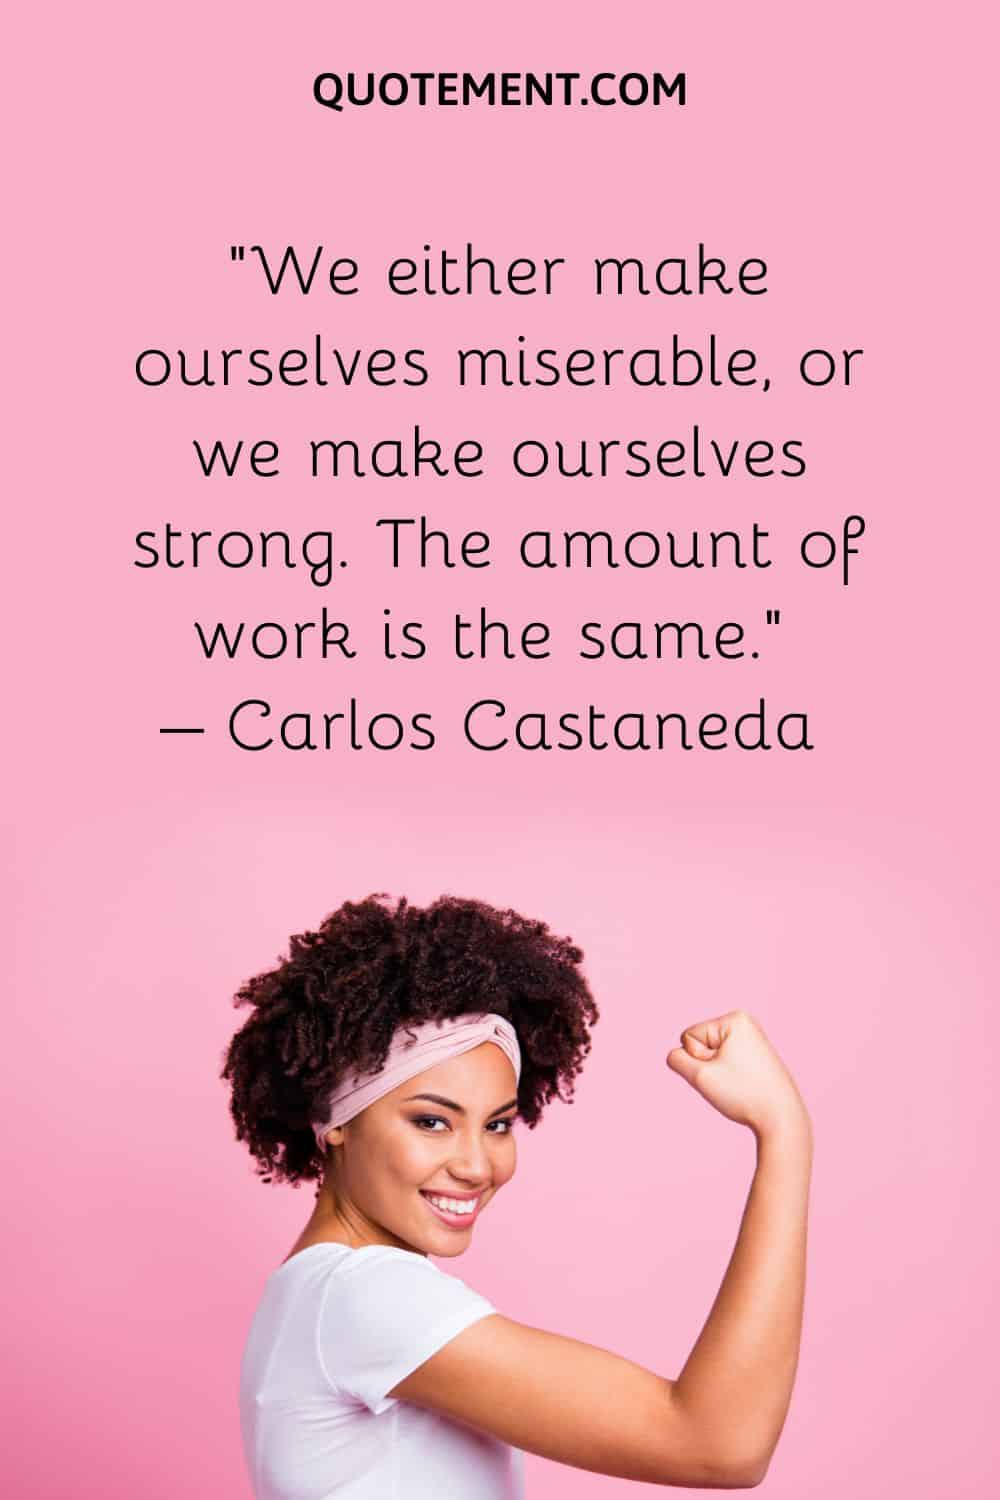 We either make ourselves miserable, or we make ourselves strong